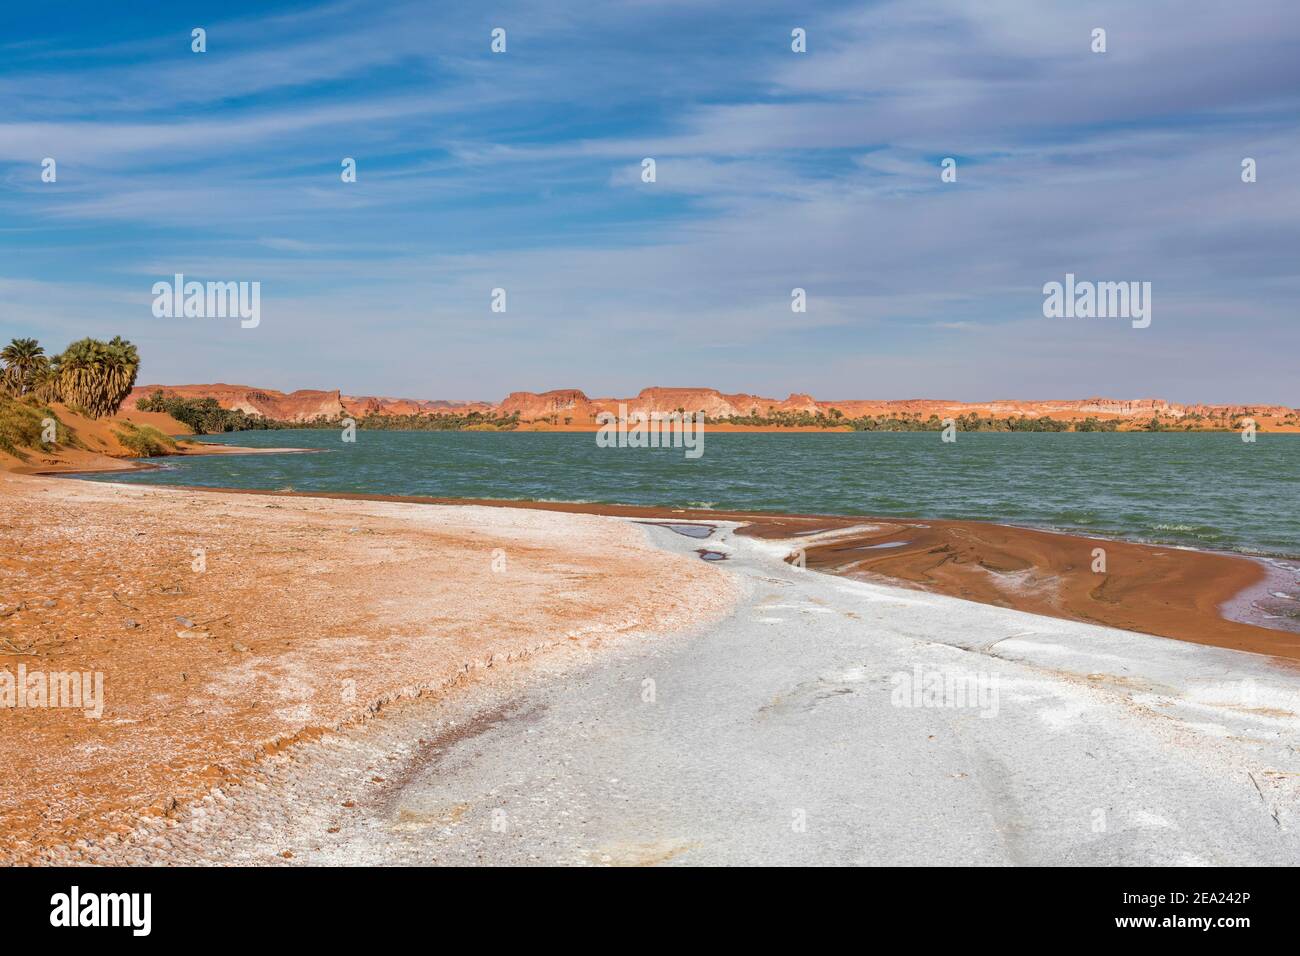 Salt crust at the shores of Ounianga kebir part of the the Unesco sight Ounianga lakes, northern Chad, Africa Stock Photo